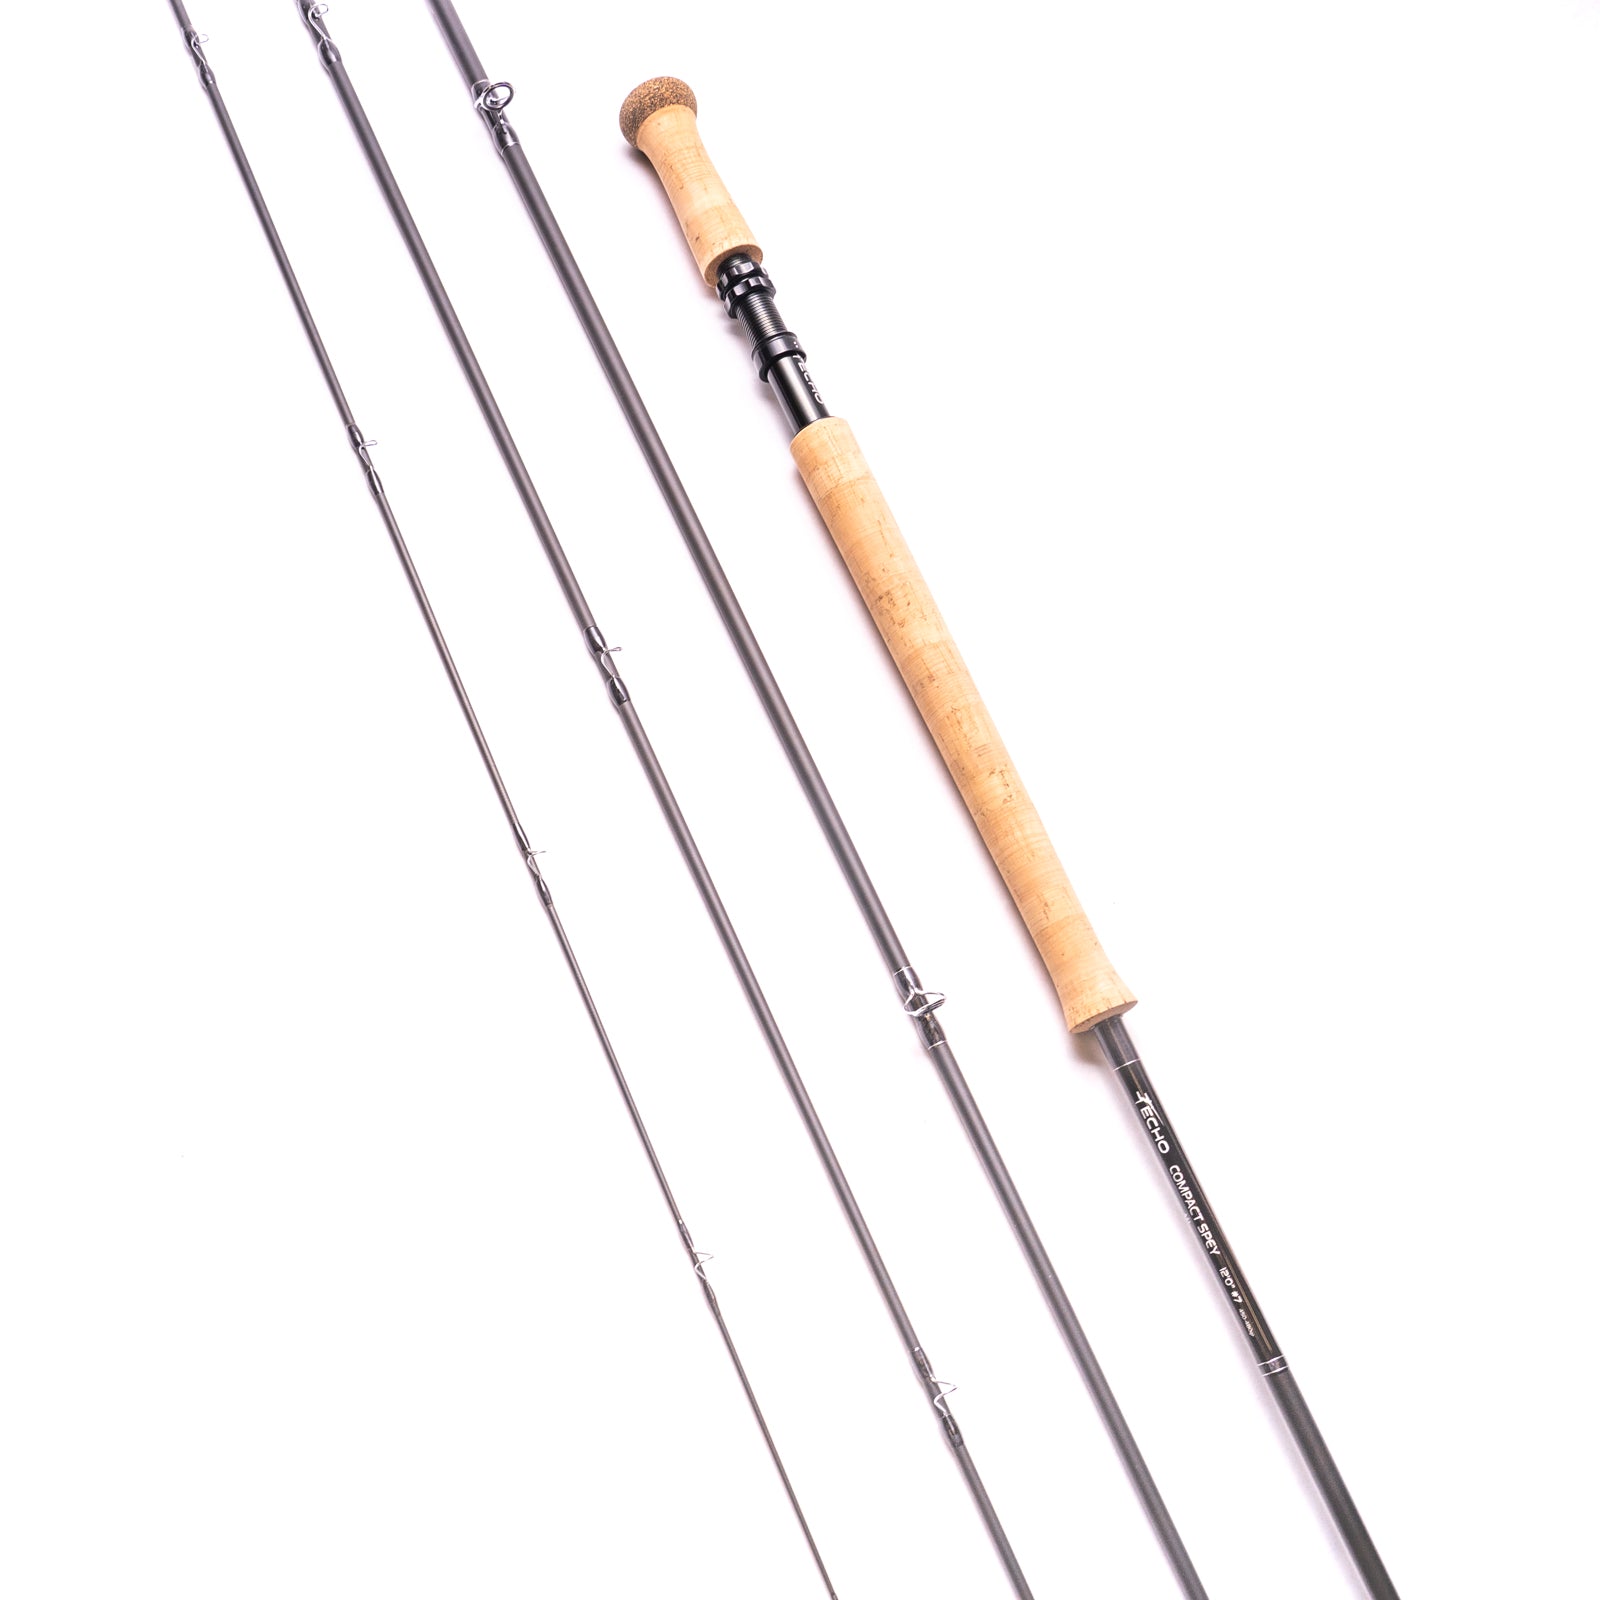 Echo Compact Spey